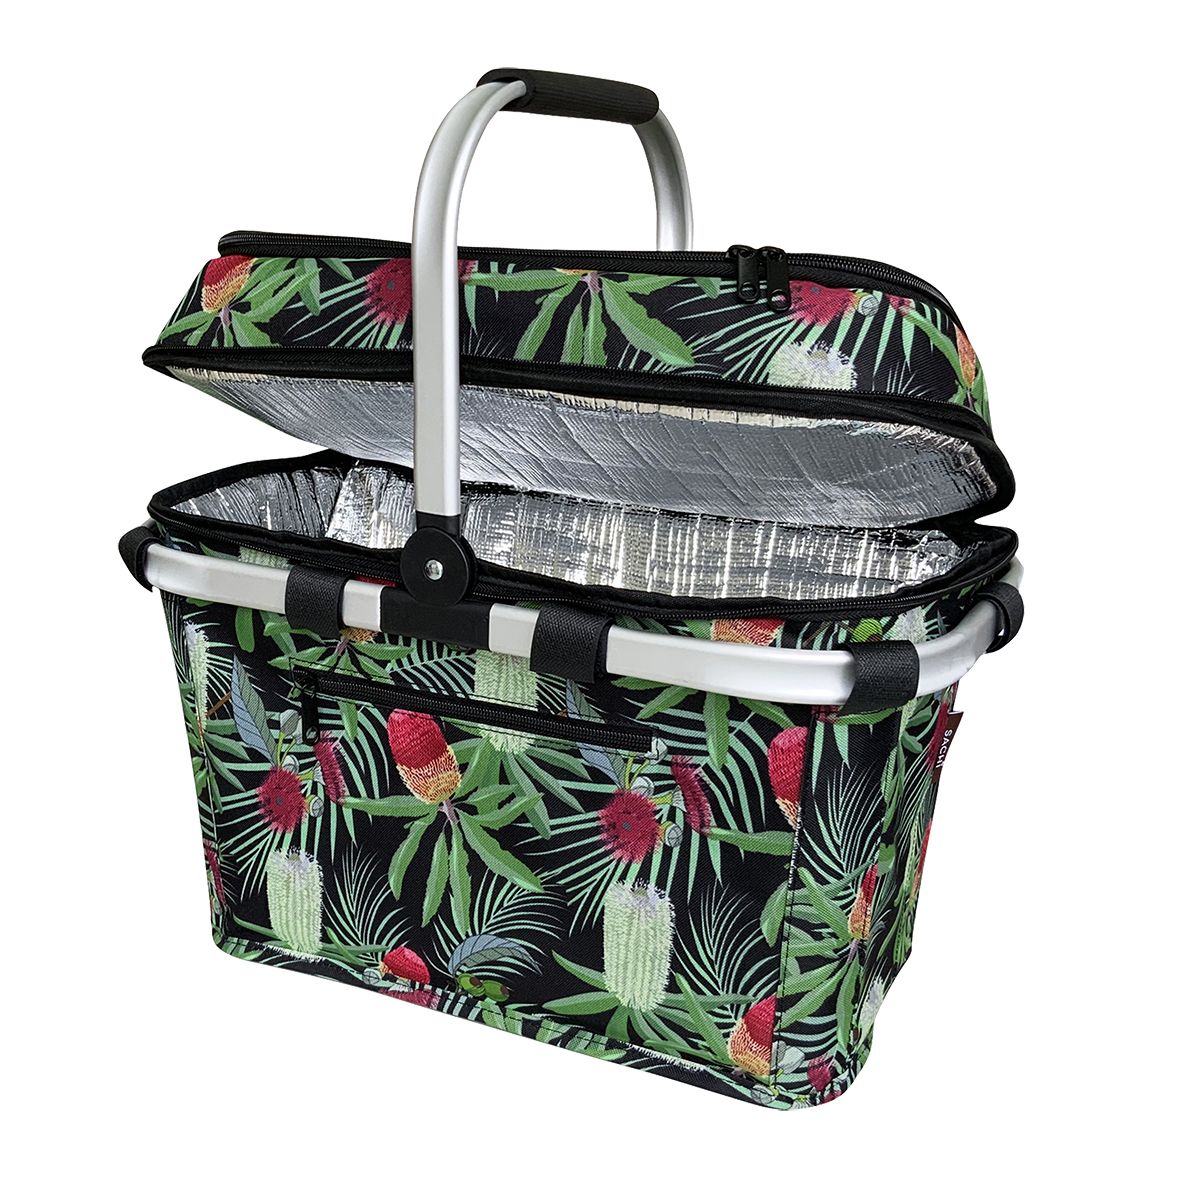 Insulated Picnic Basket - Banksia